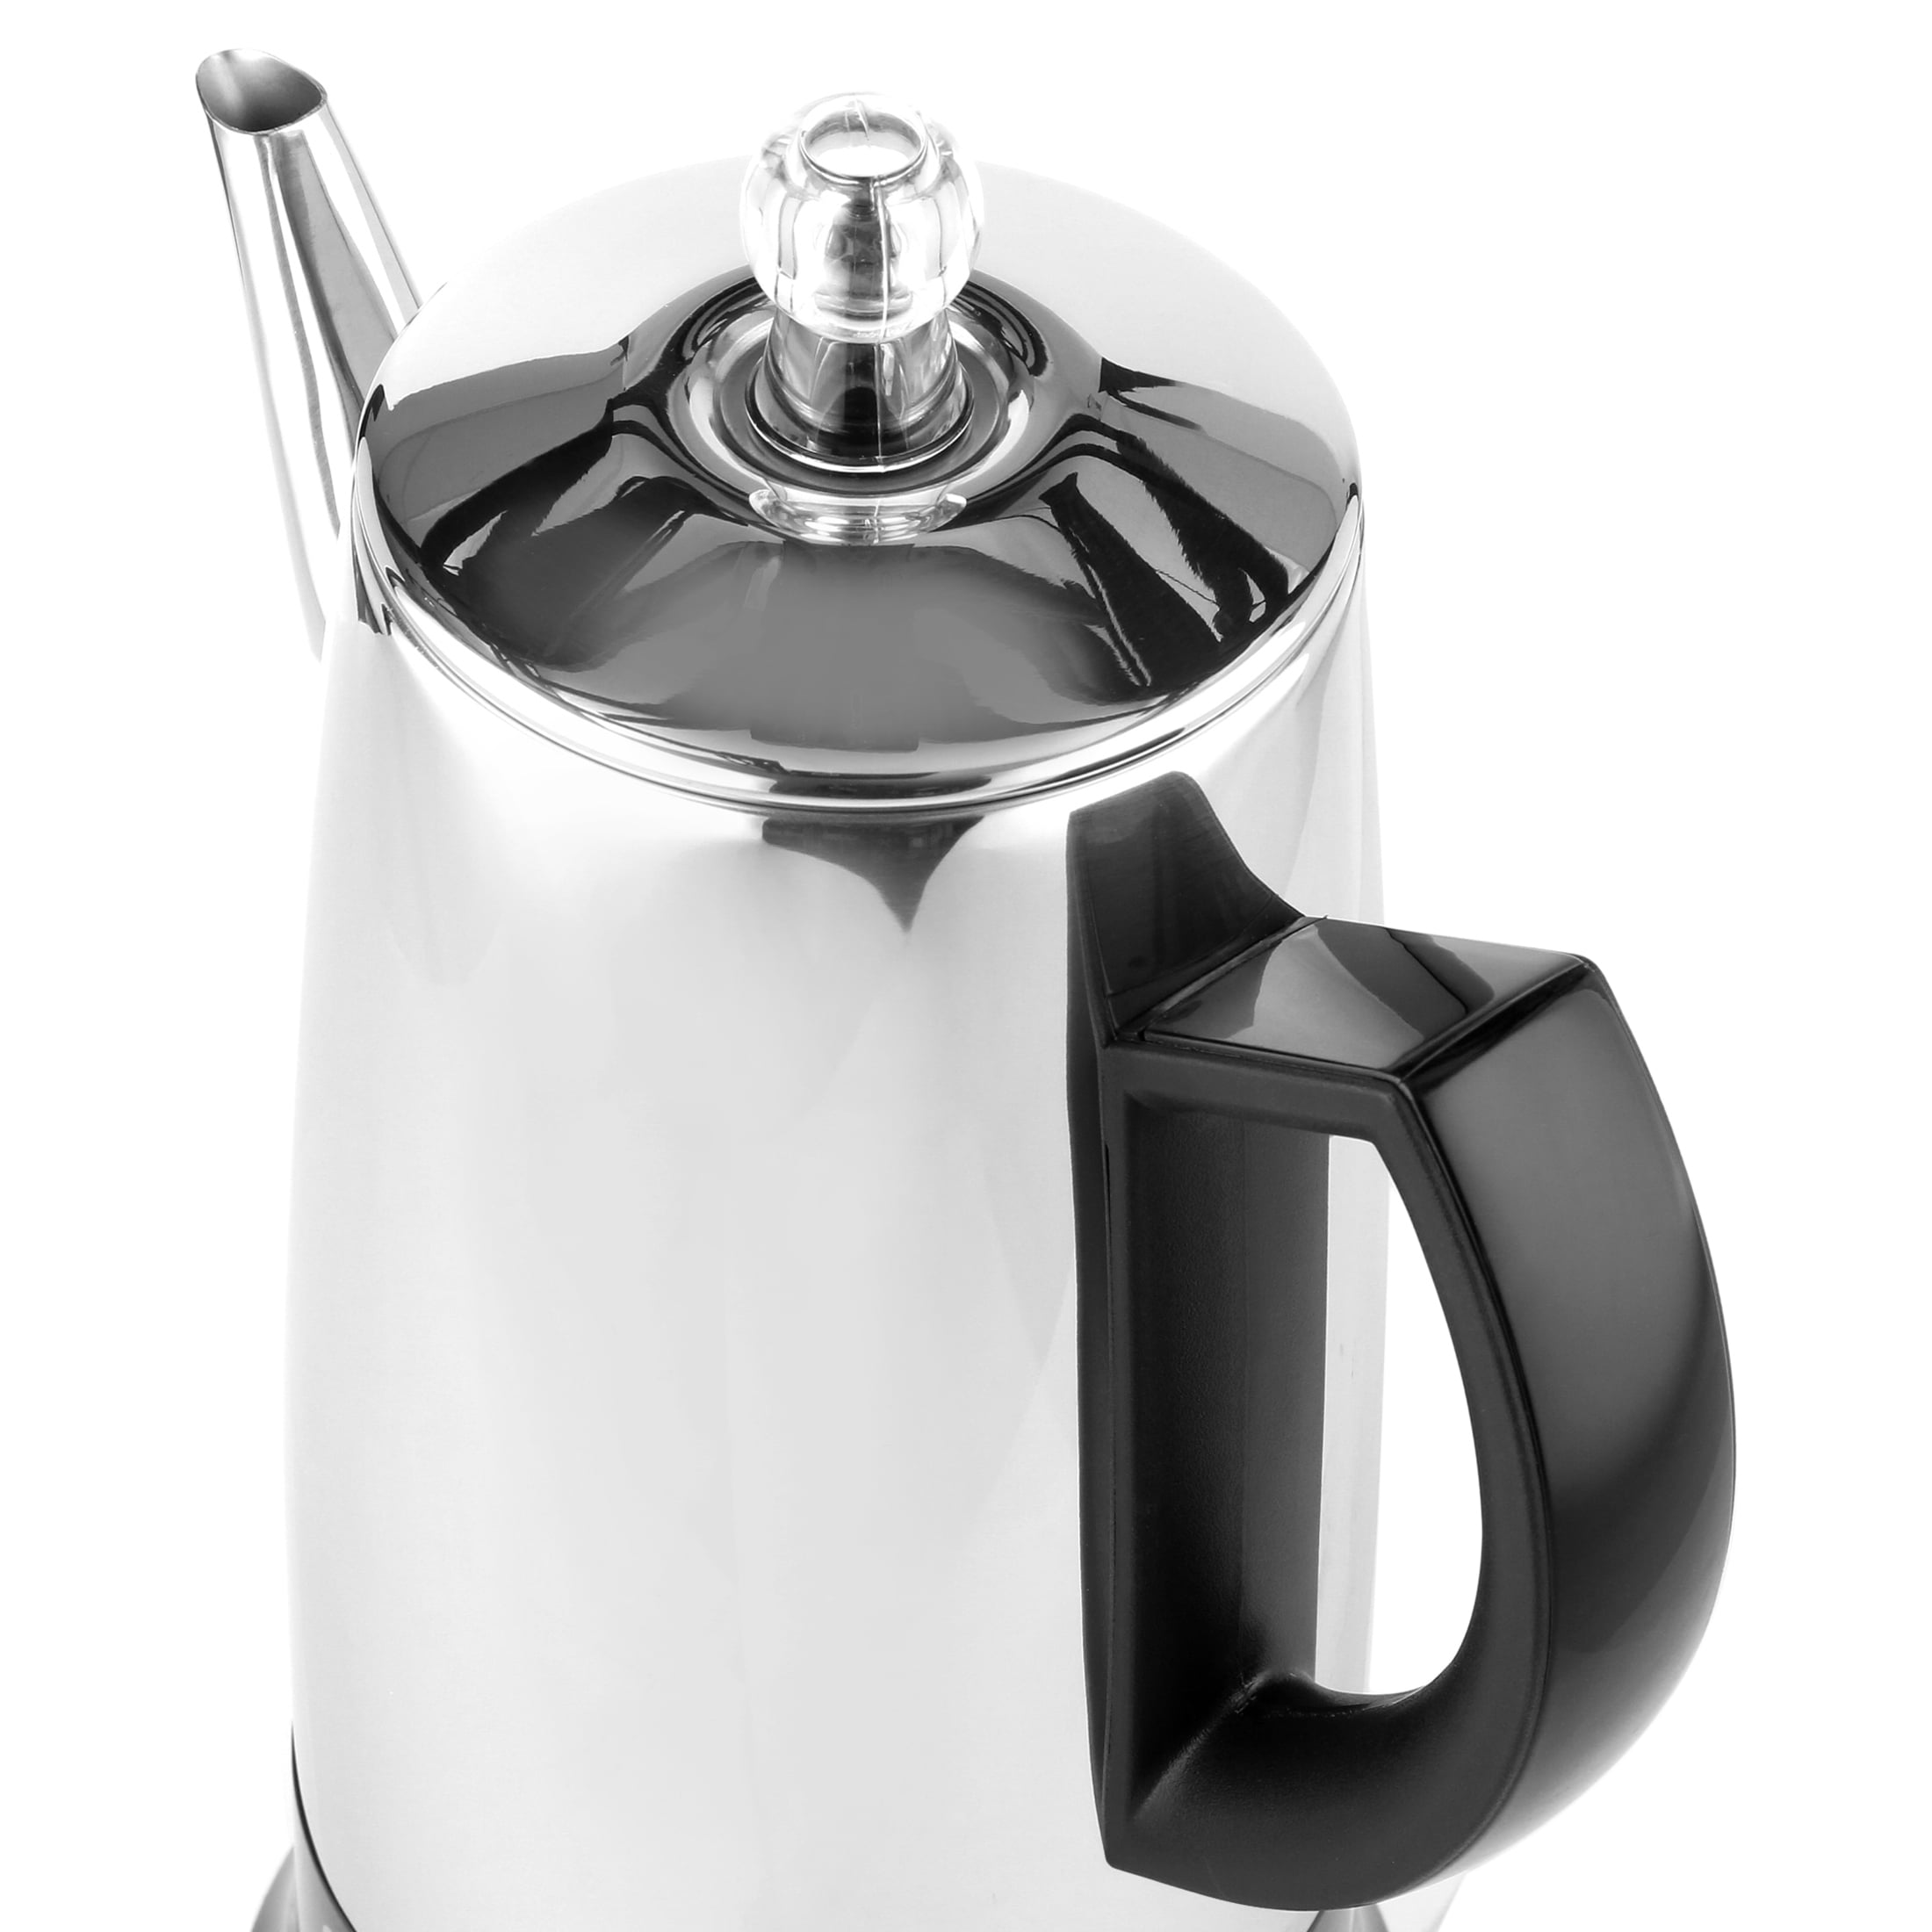 HOMOKUS Electric Coffee Percolator 12 CUPS Percolator Coffee Pot, 800W  Percolator Coffee Maker Stainless Steel with Clear Knob Cool-touch Handle